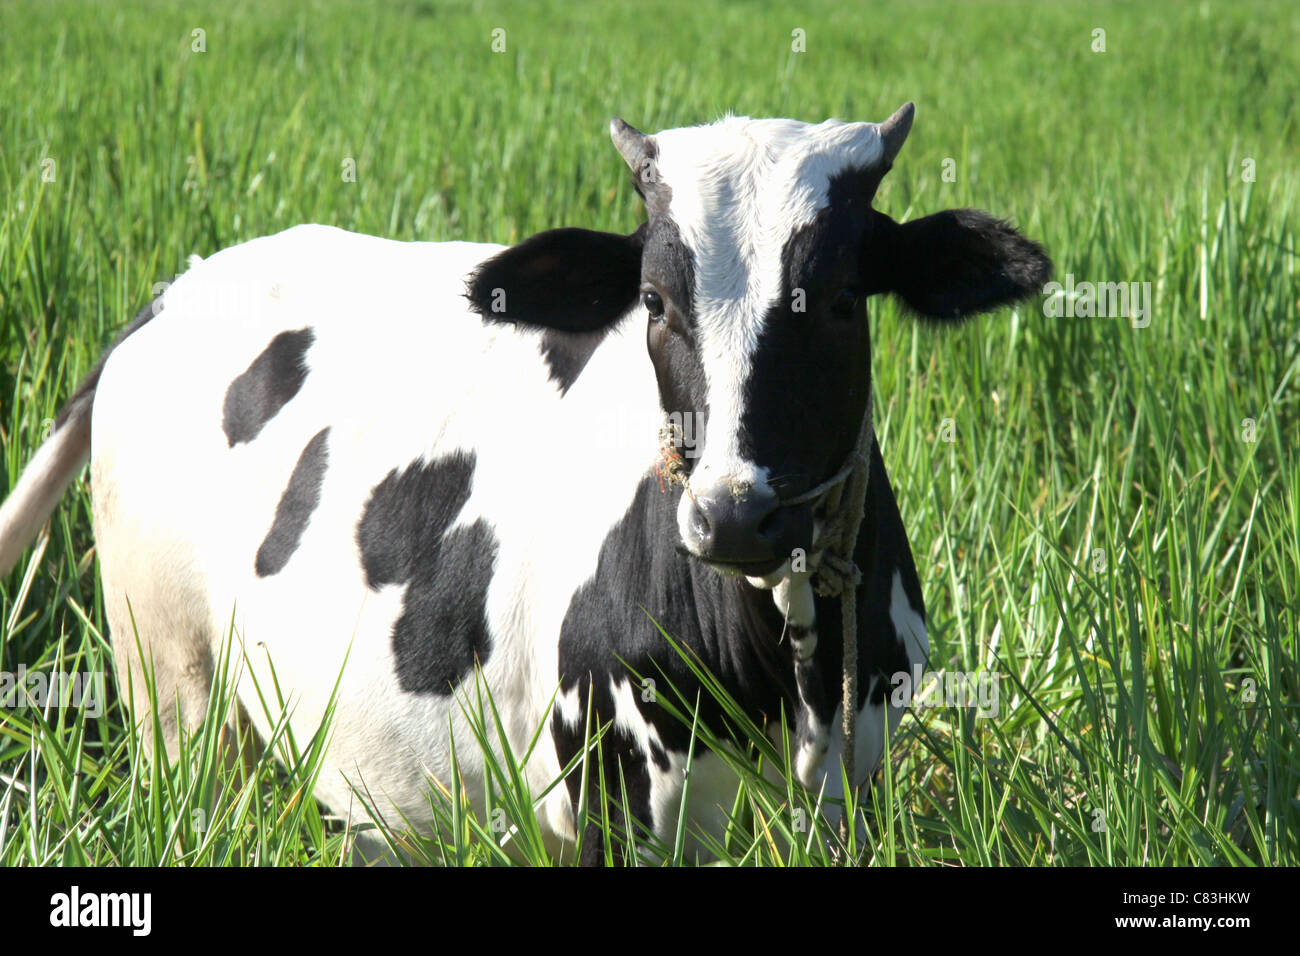 Black and white jersey breed cow in green grass Stock Photo - Alamy